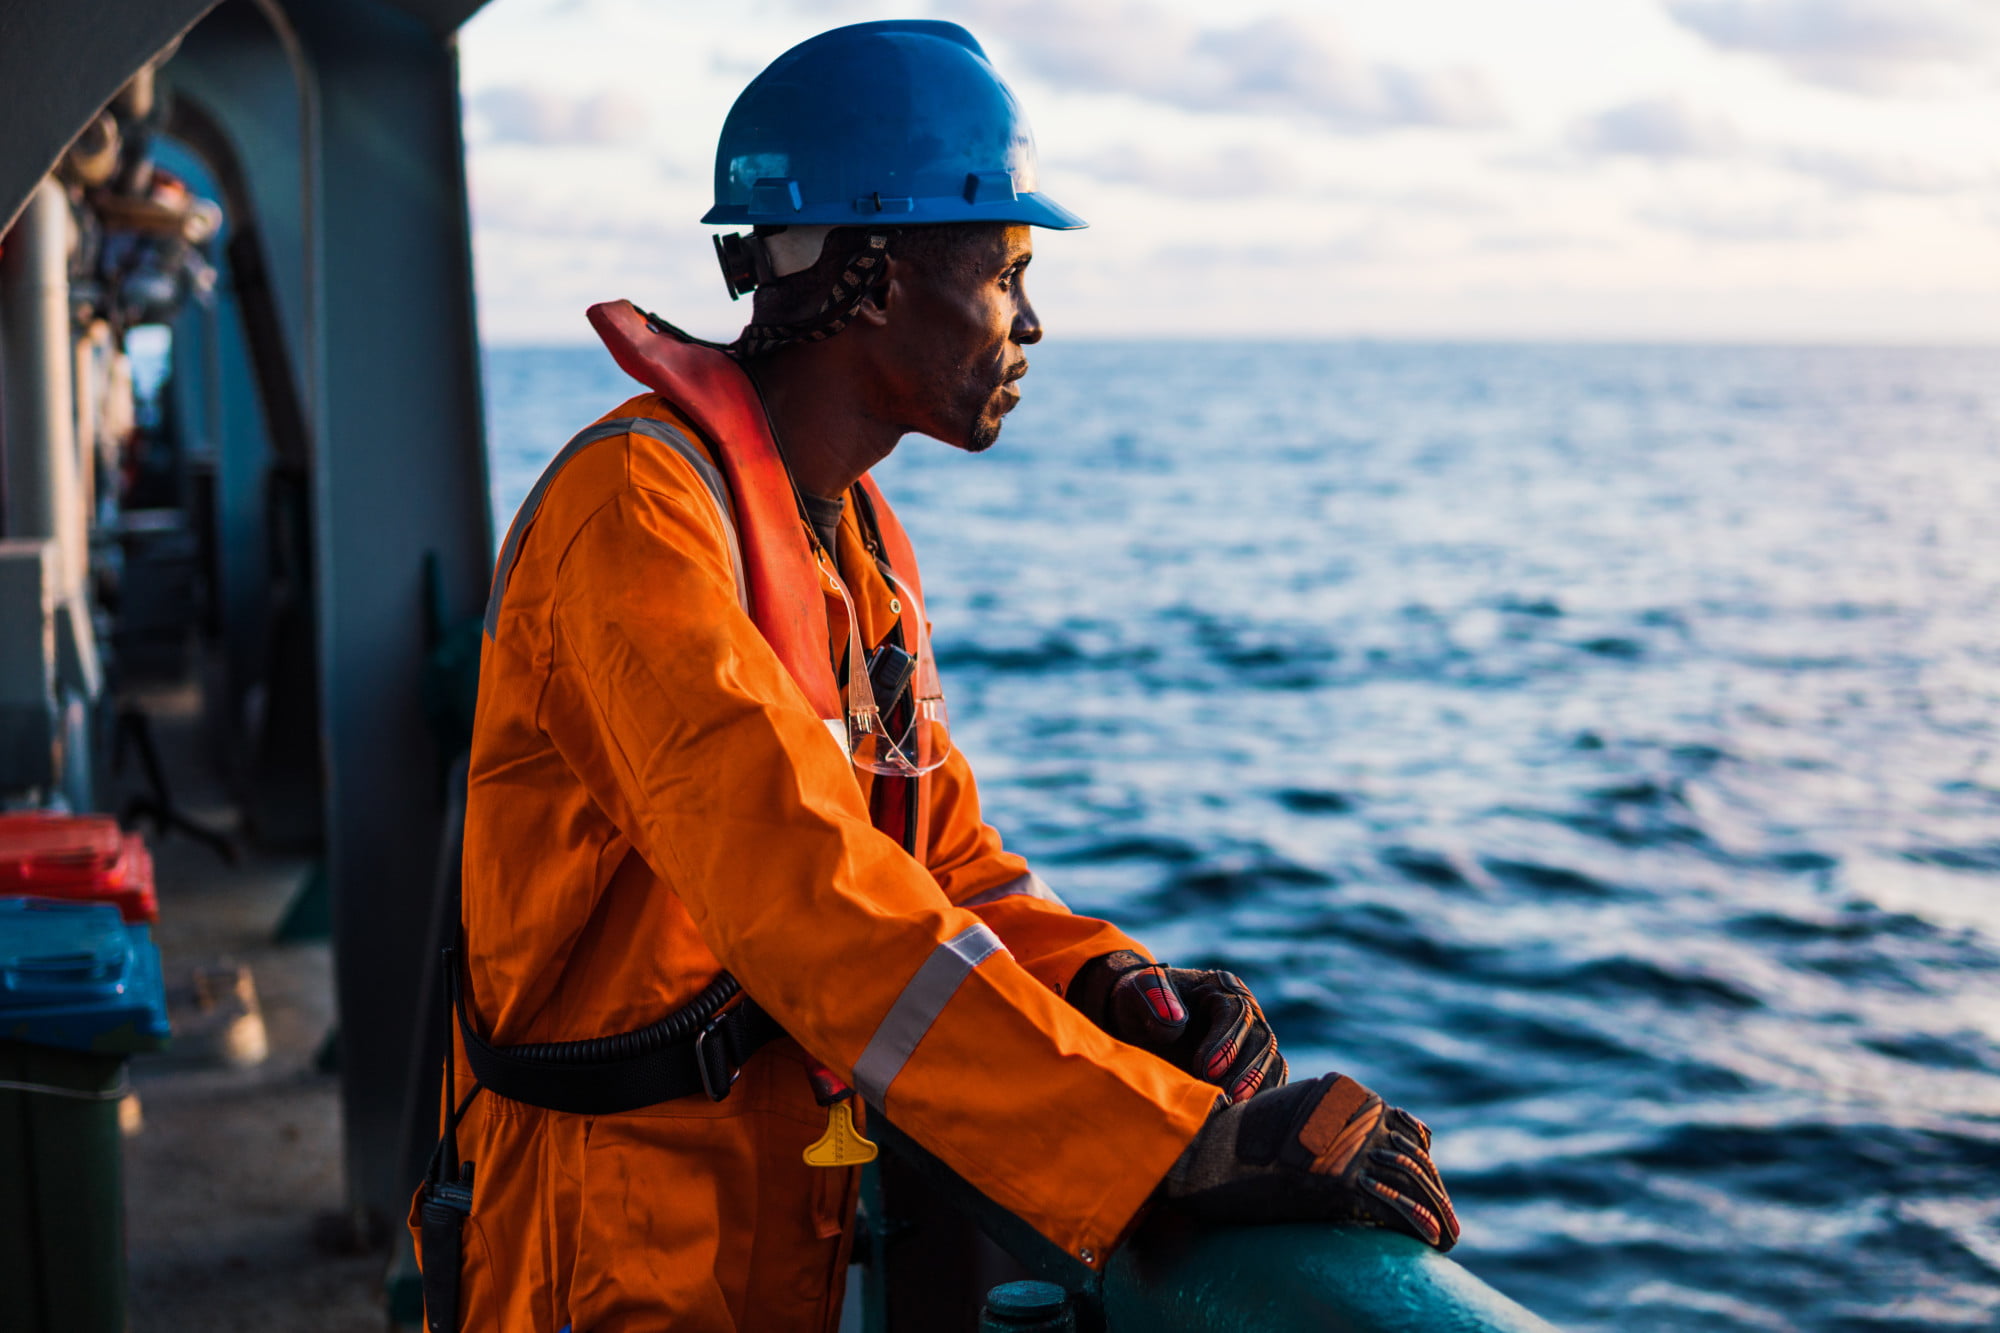 An offshore injury lawyer deals with injuries that are caused by offshore accidents. Find out more about their role in this article.